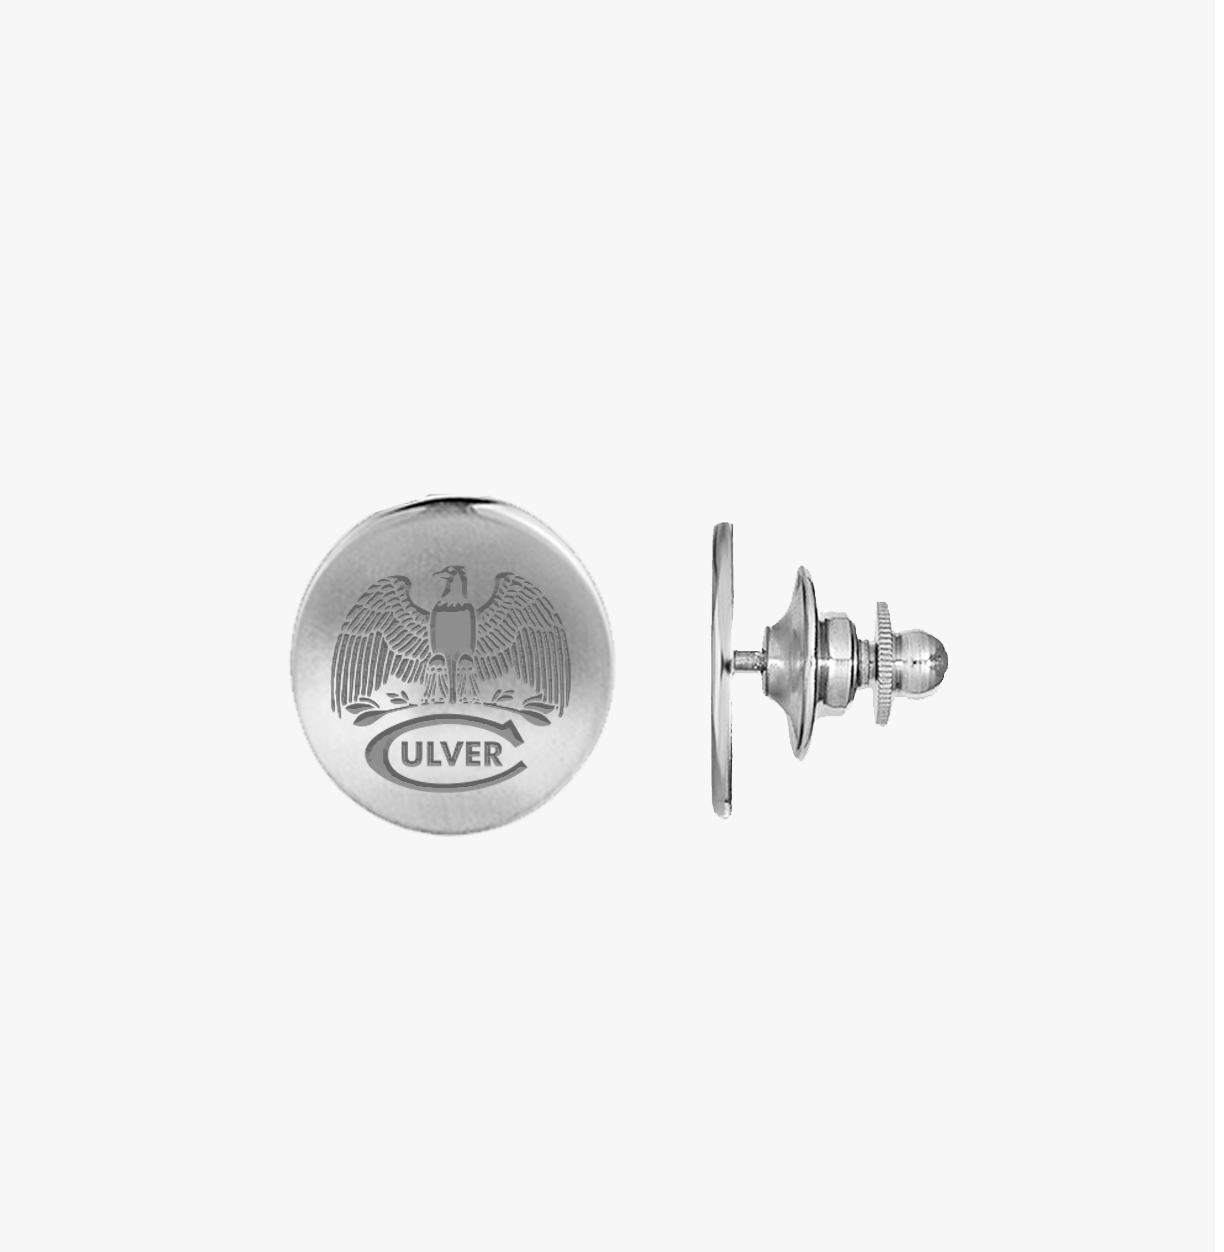 Culver Lapel Pin - Sterling Silver